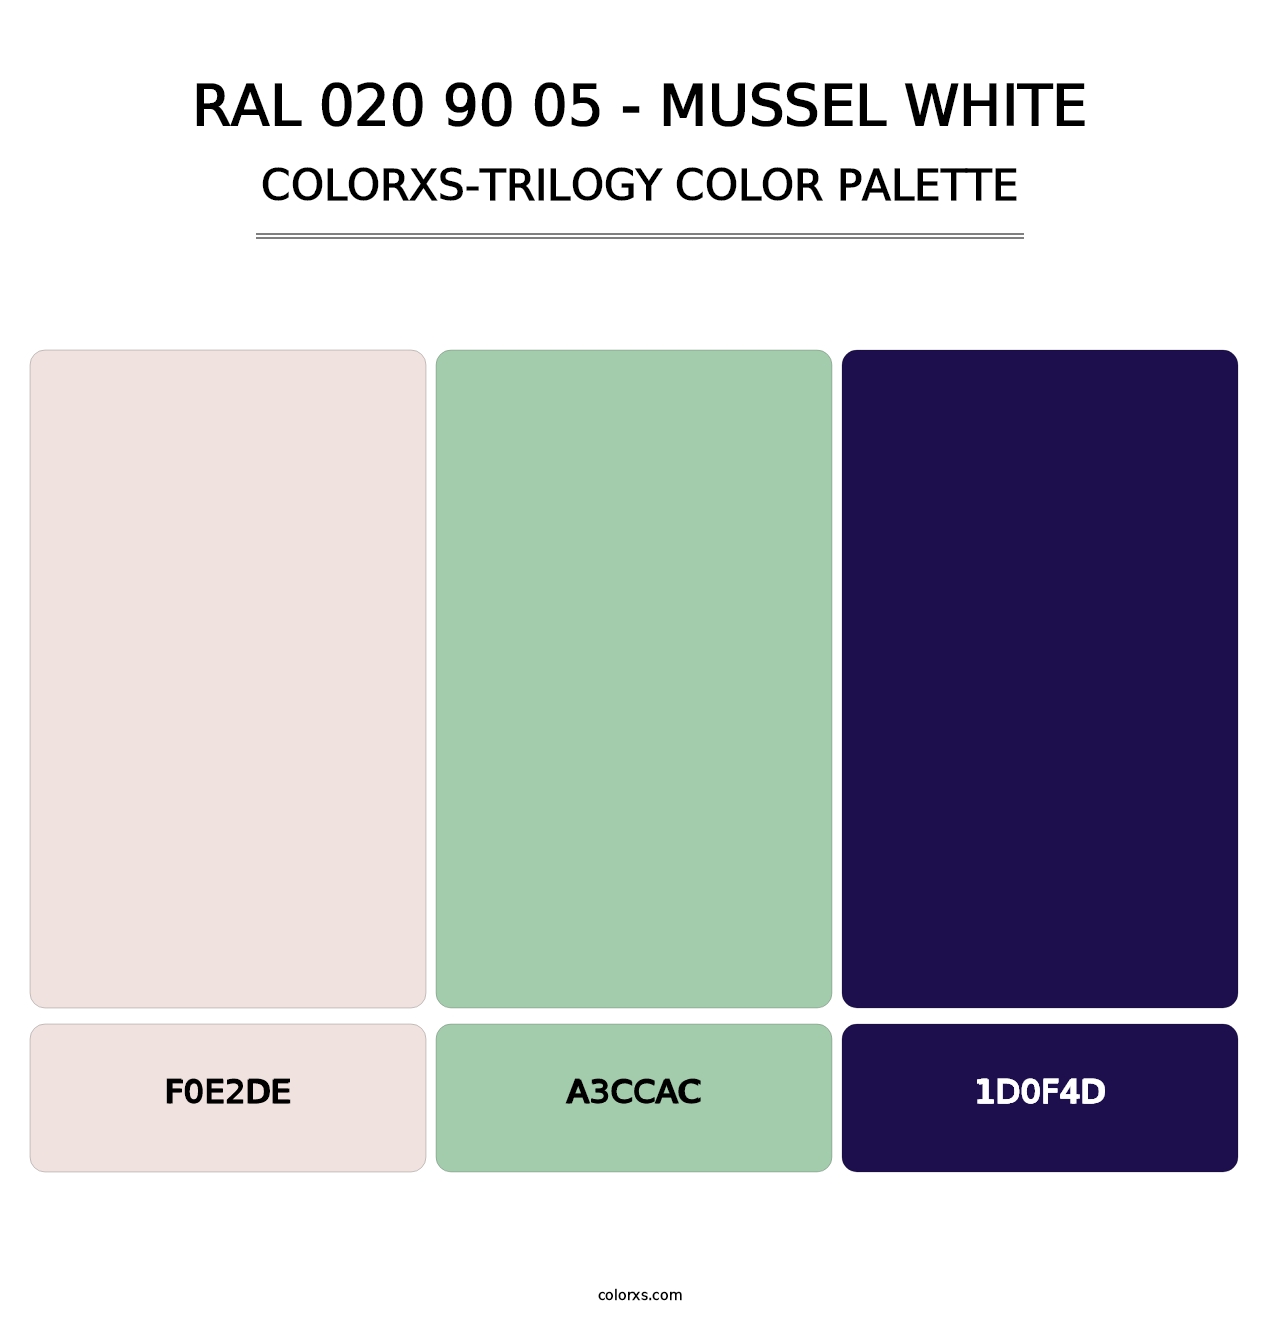 RAL 020 90 05 - Mussel White - Colorxs Trilogy Palette